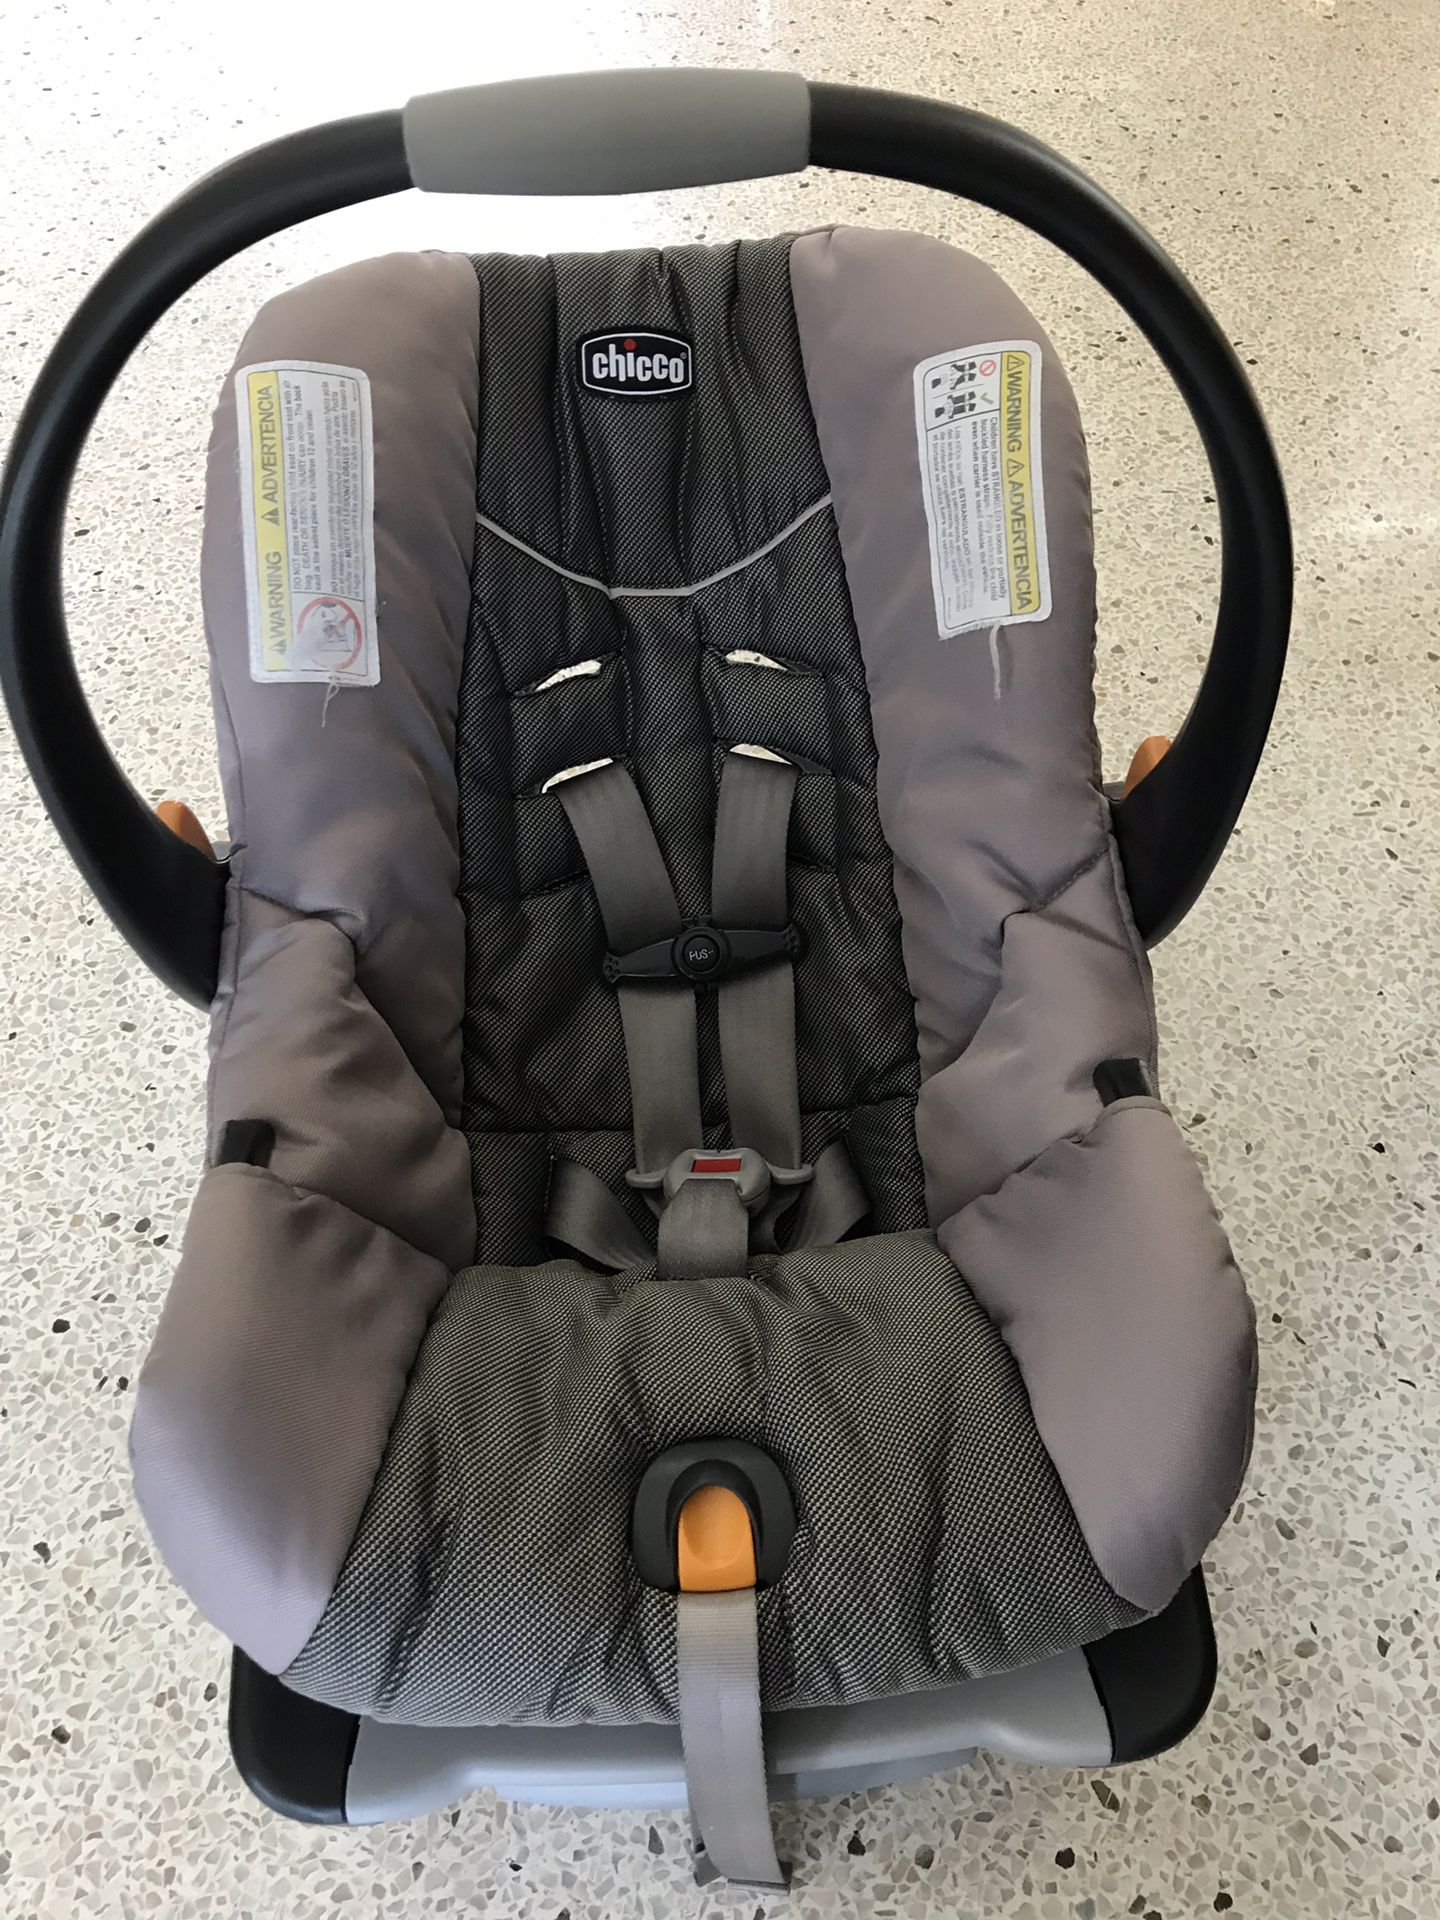 Chicco Keyfit30 car seat with 2 bases